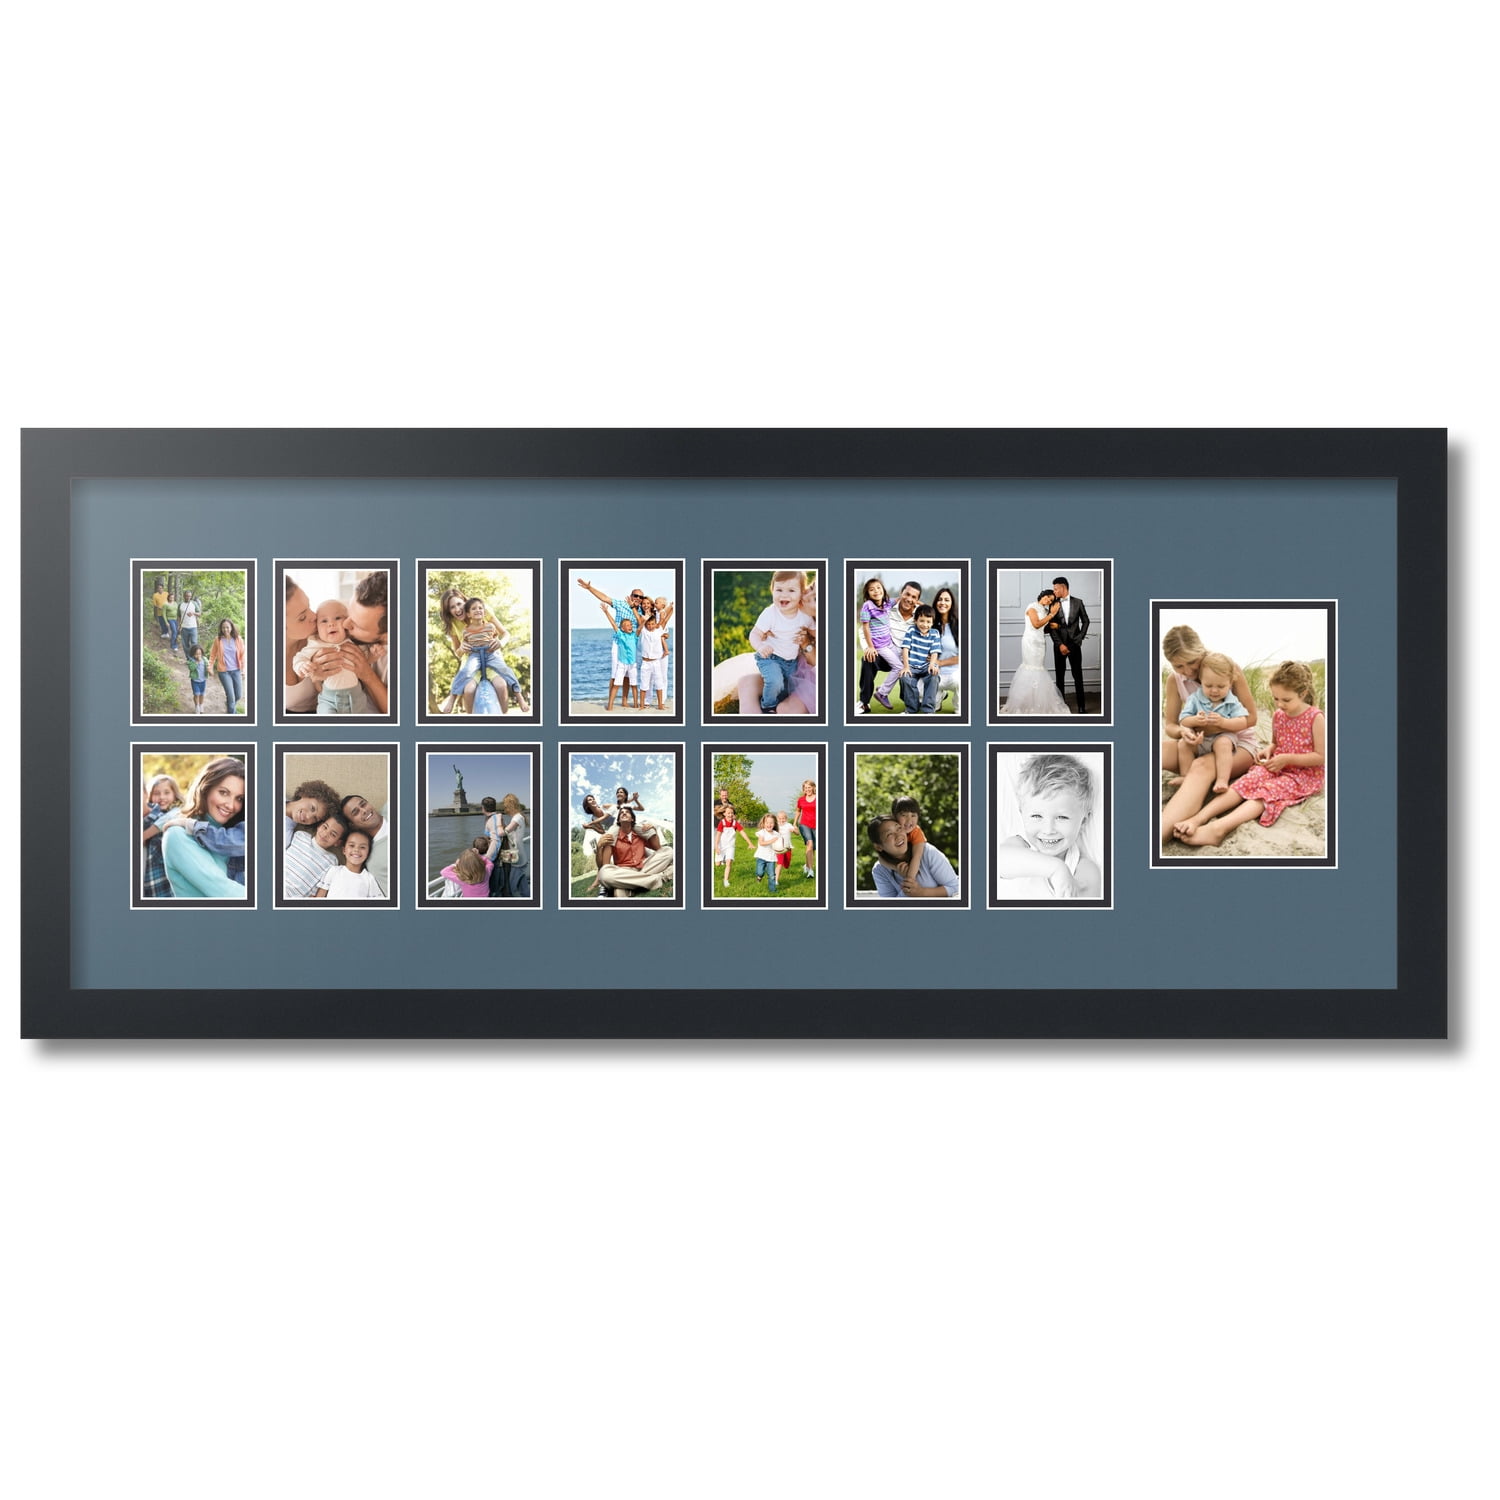 HUGE FELT SIX PHOTO PICTURE FRAME COLLAGE FAMILY SENTIMENT MEMORIES GIFT NEW 